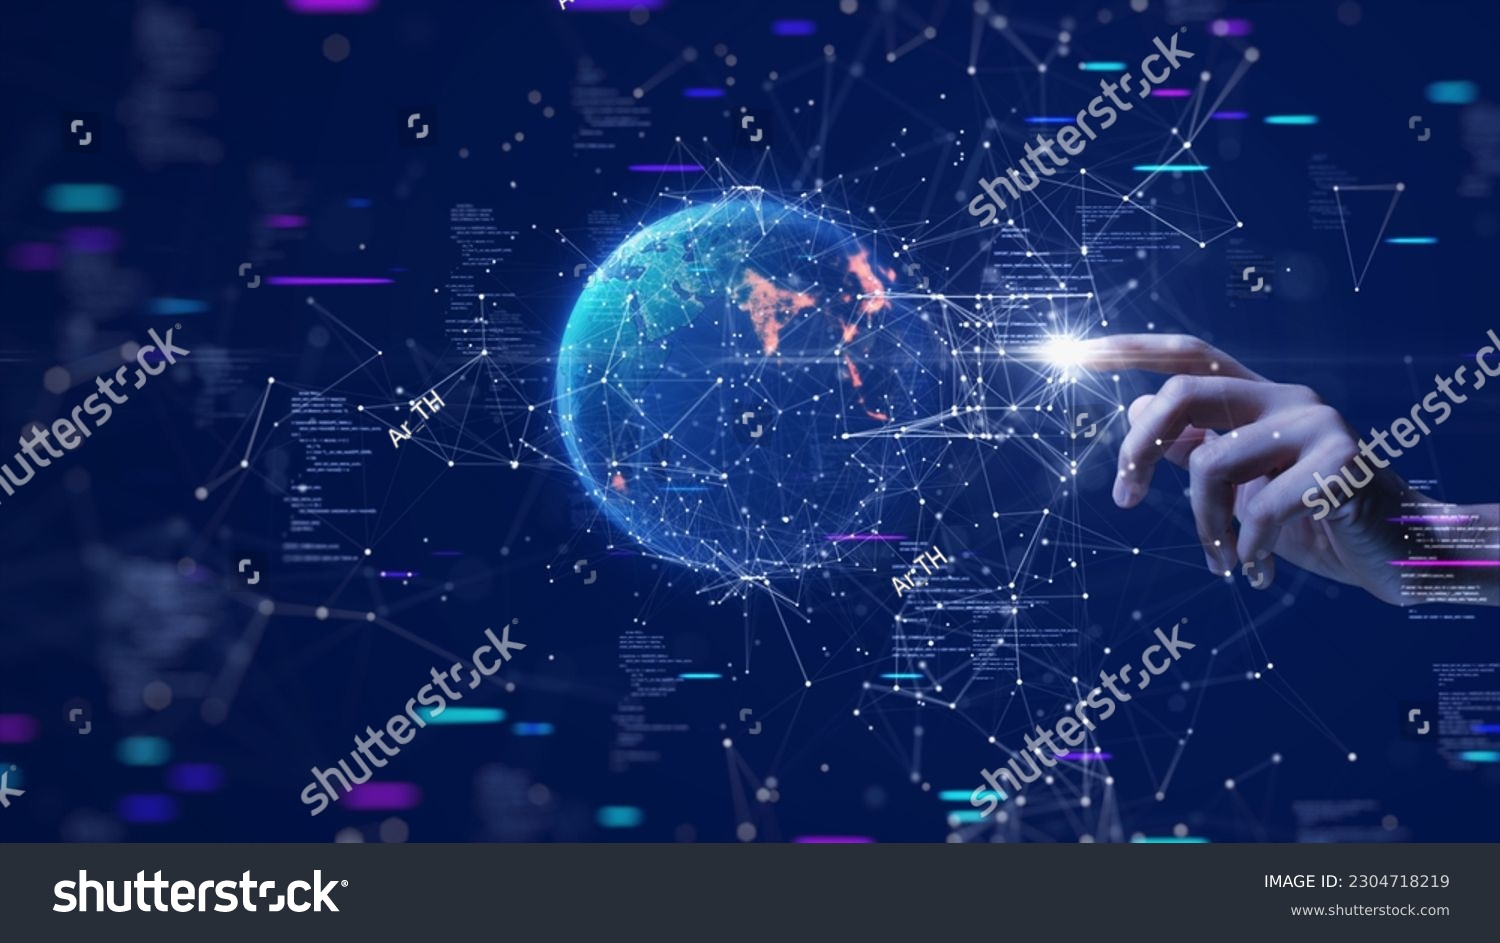 Digital cyber era technology concept. Human hand touching interconnected polygons of massive amounts of data glowing on a dark blue background. New innovations that are coming to change the world. #2304718219